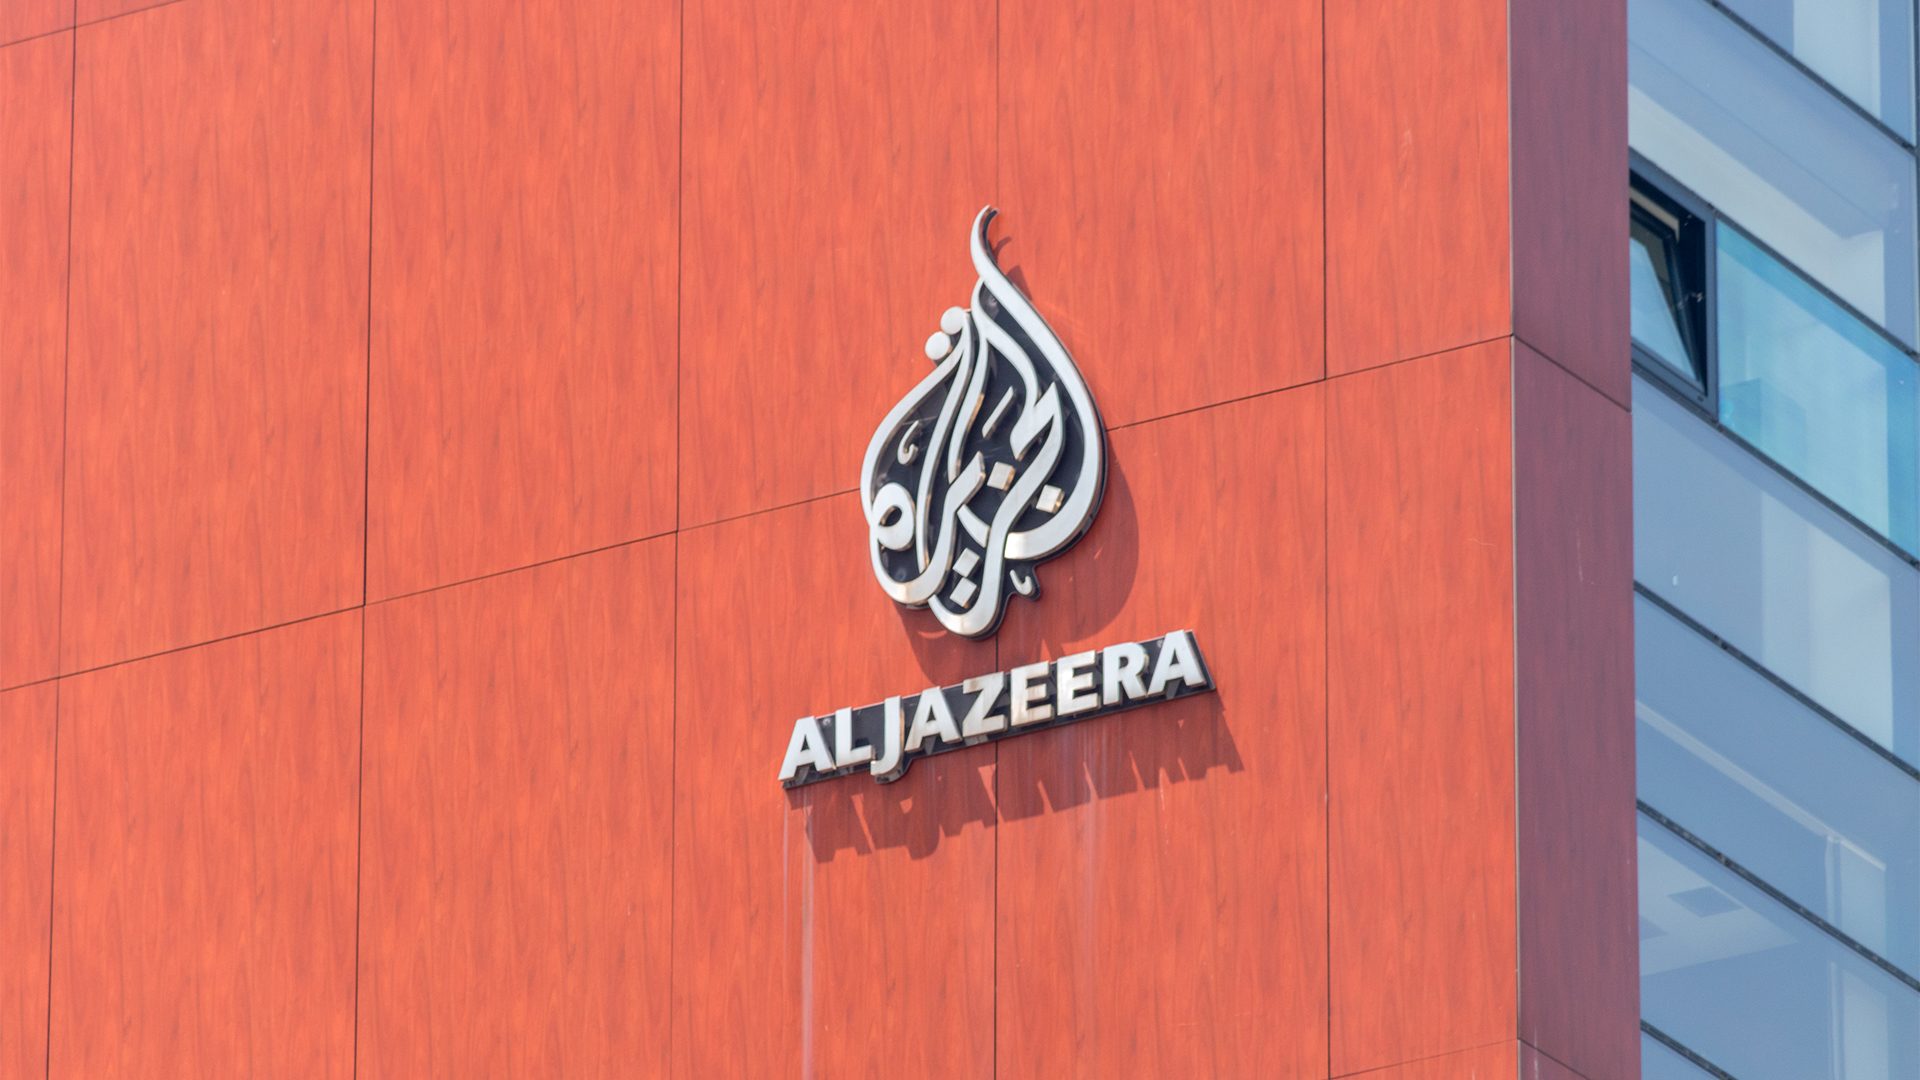 Israel extends Al Jazeera ban by 45 days, citing security threat